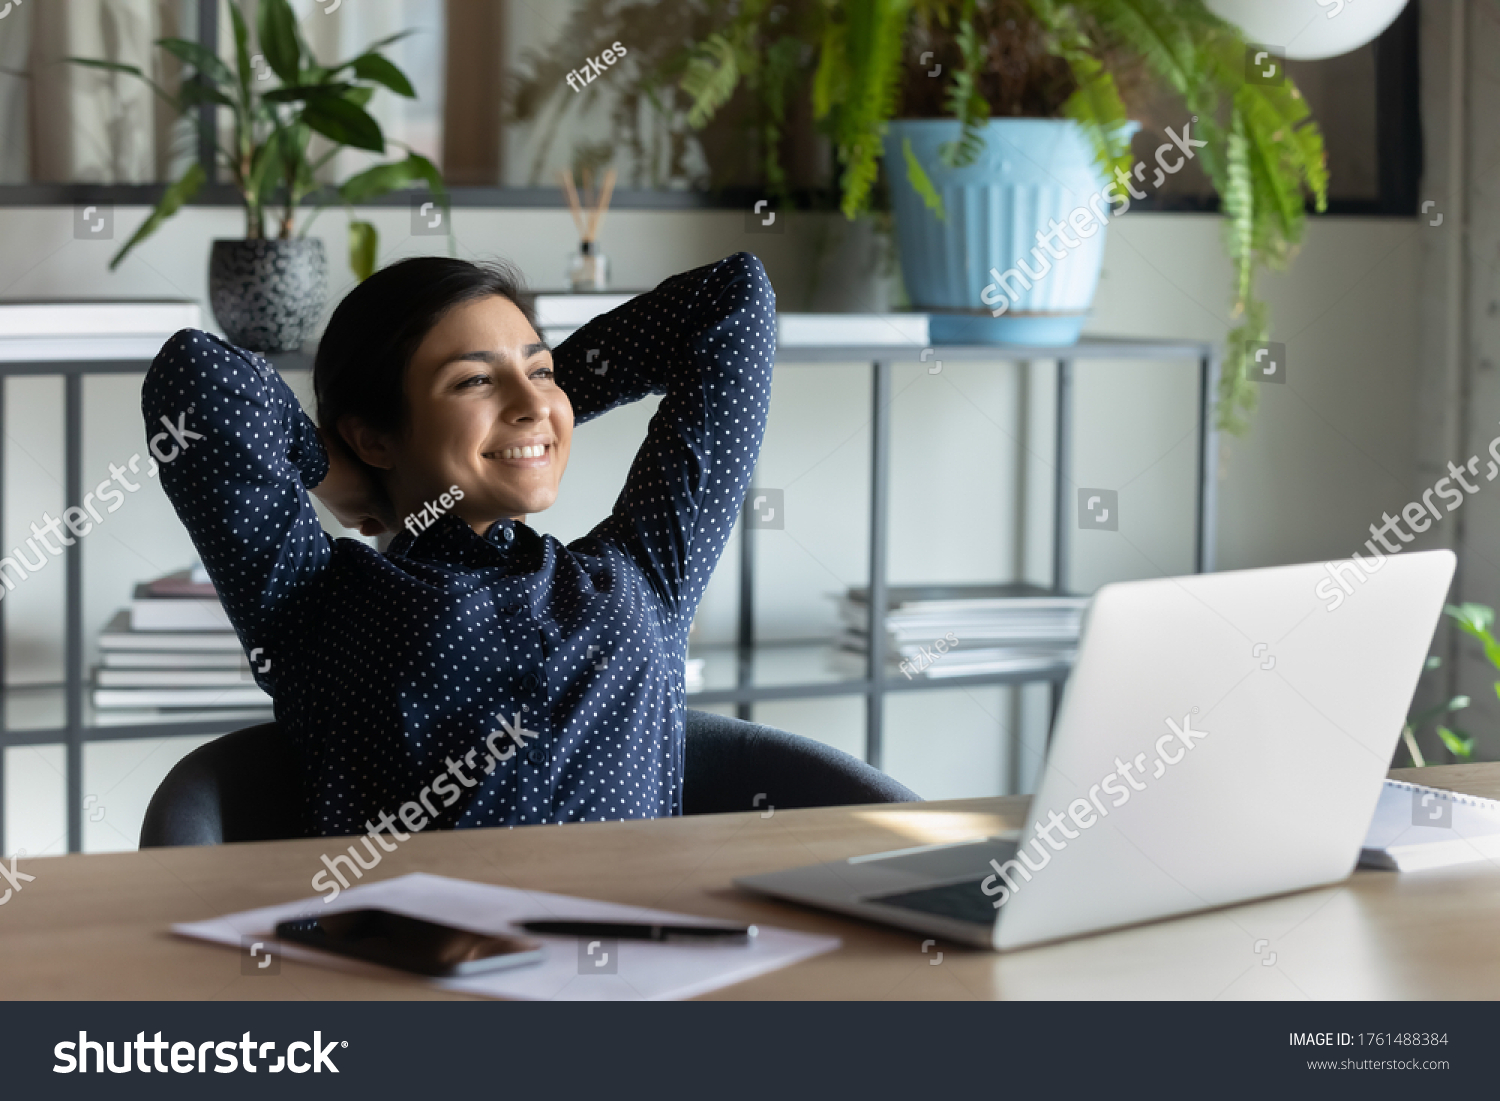 Carefree indian employee resting after busy fruitful workday leaned on office chair puts hands behind head feels satisfied by work done, achievements, job promotion, looking in distance out the window #1761488384